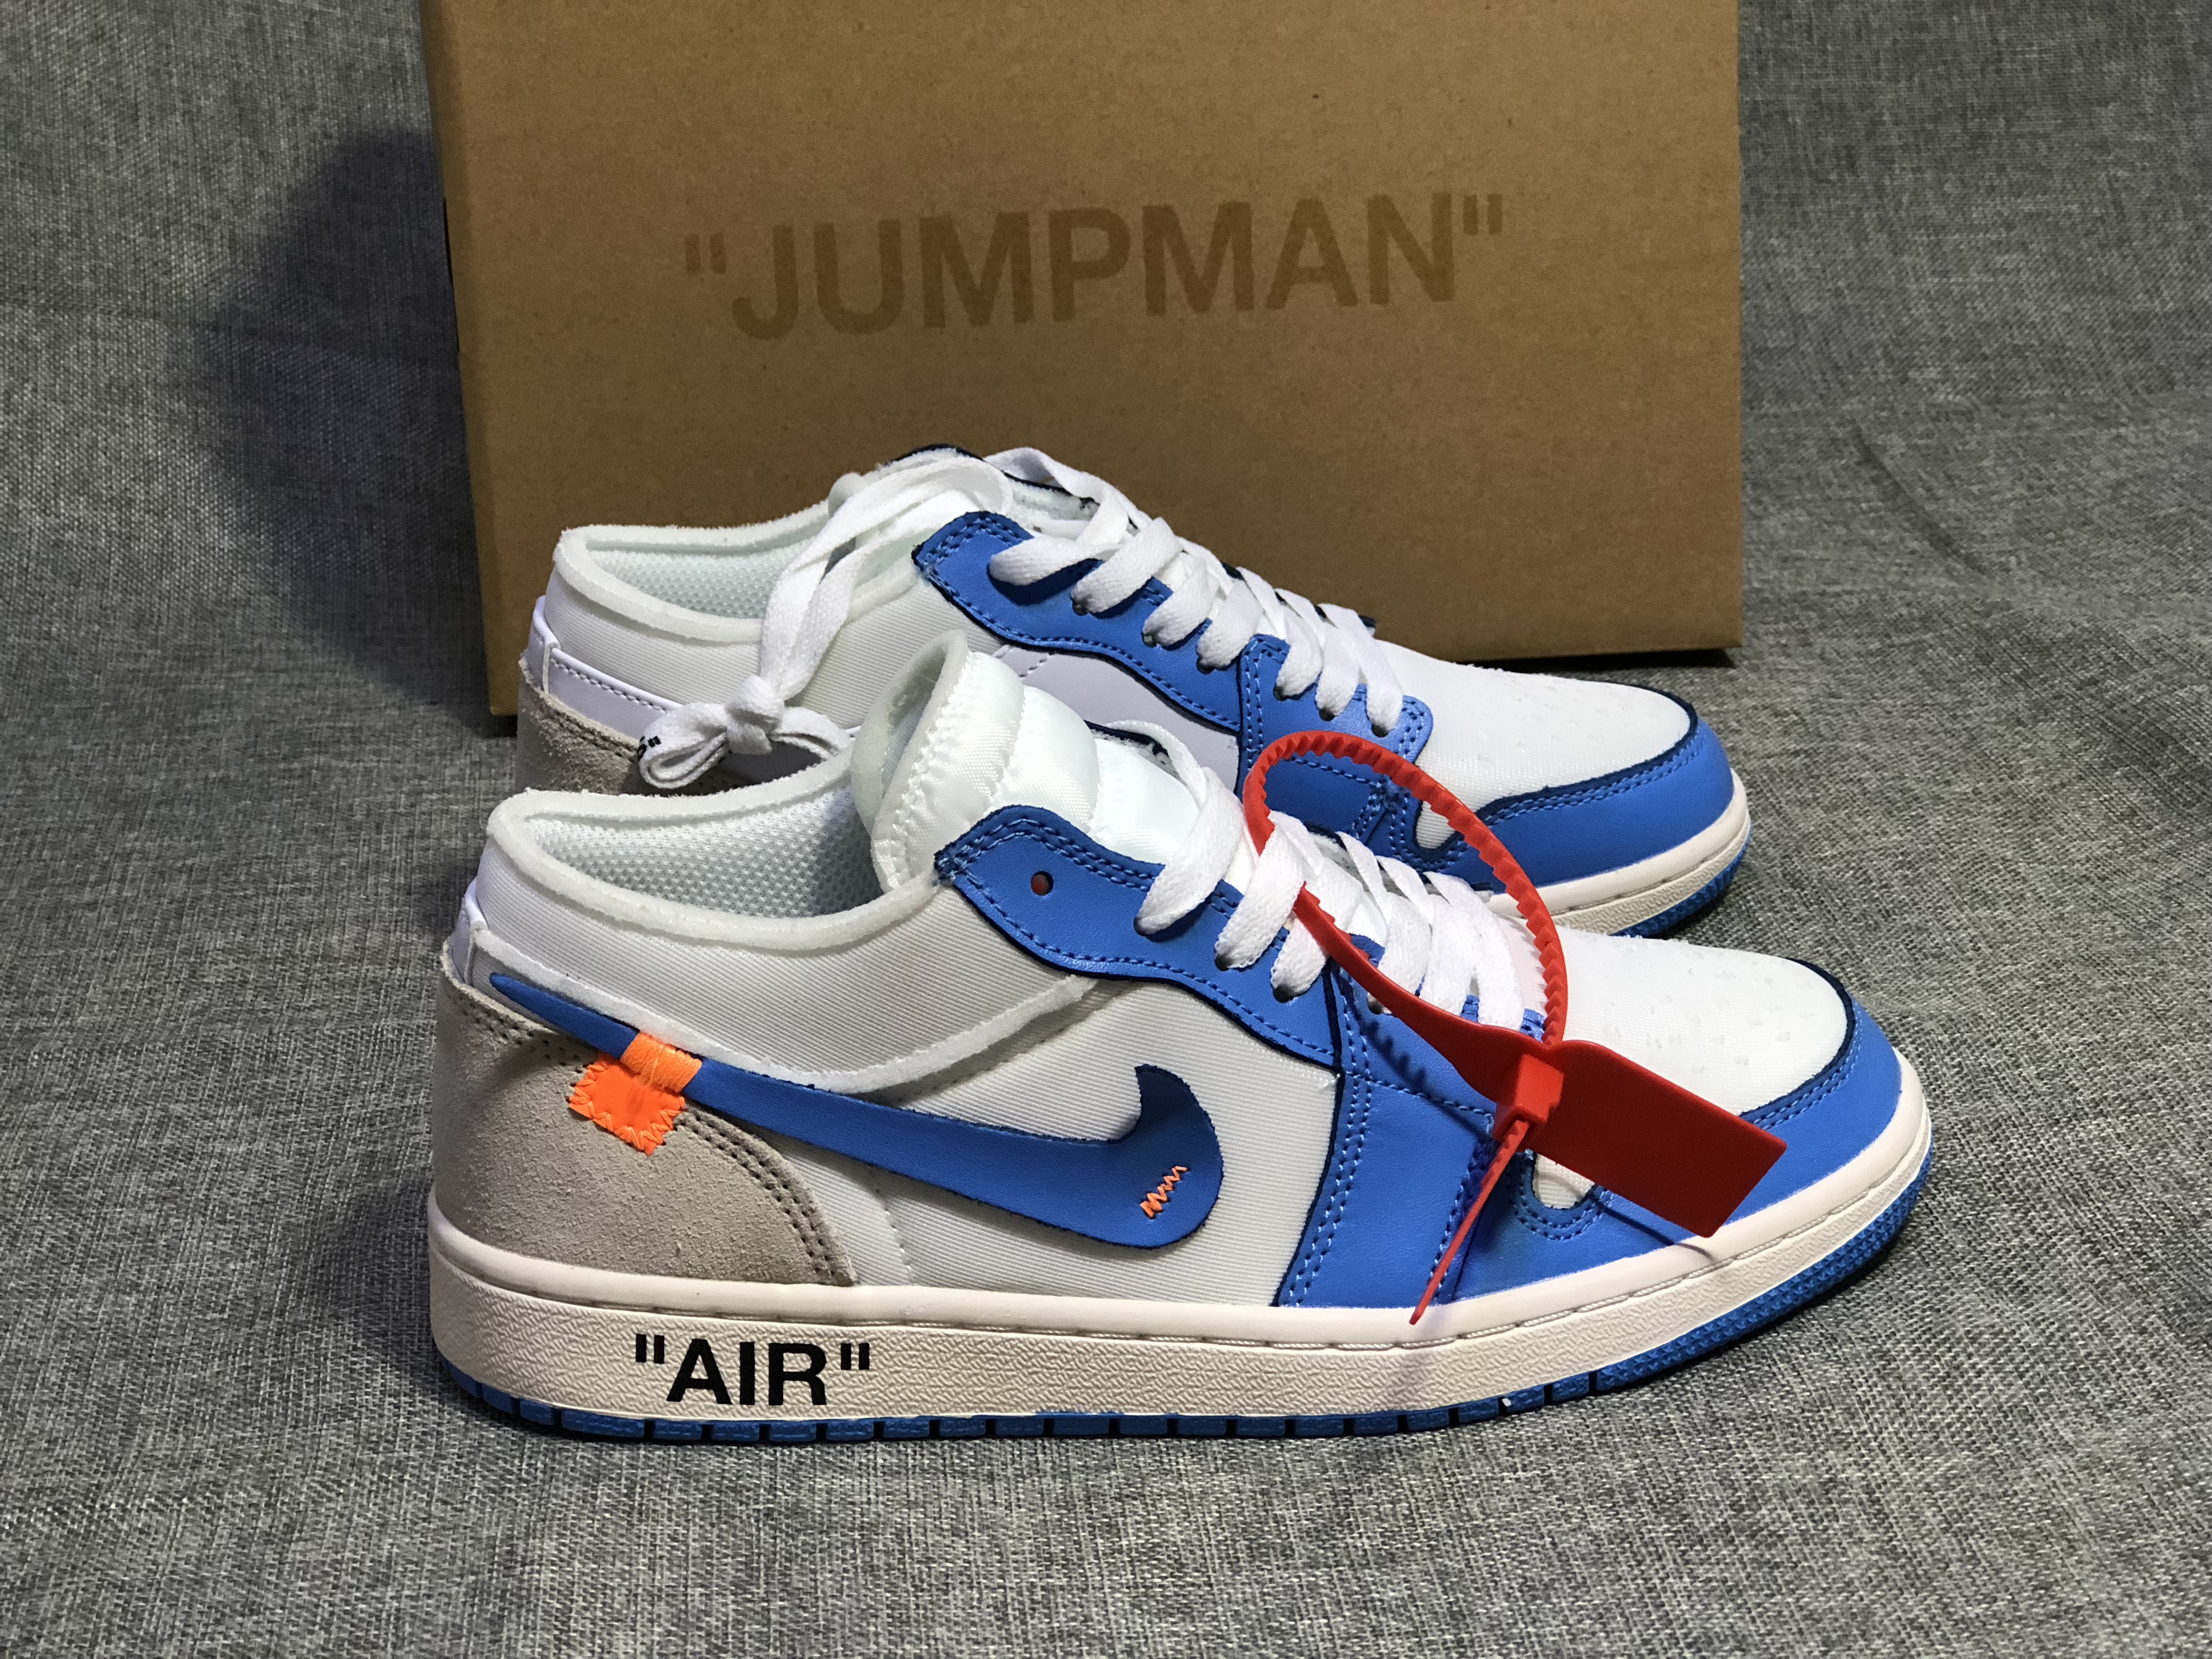 Air Jordan 1 Low x Off-white White Blue Shoes - Click Image to Close